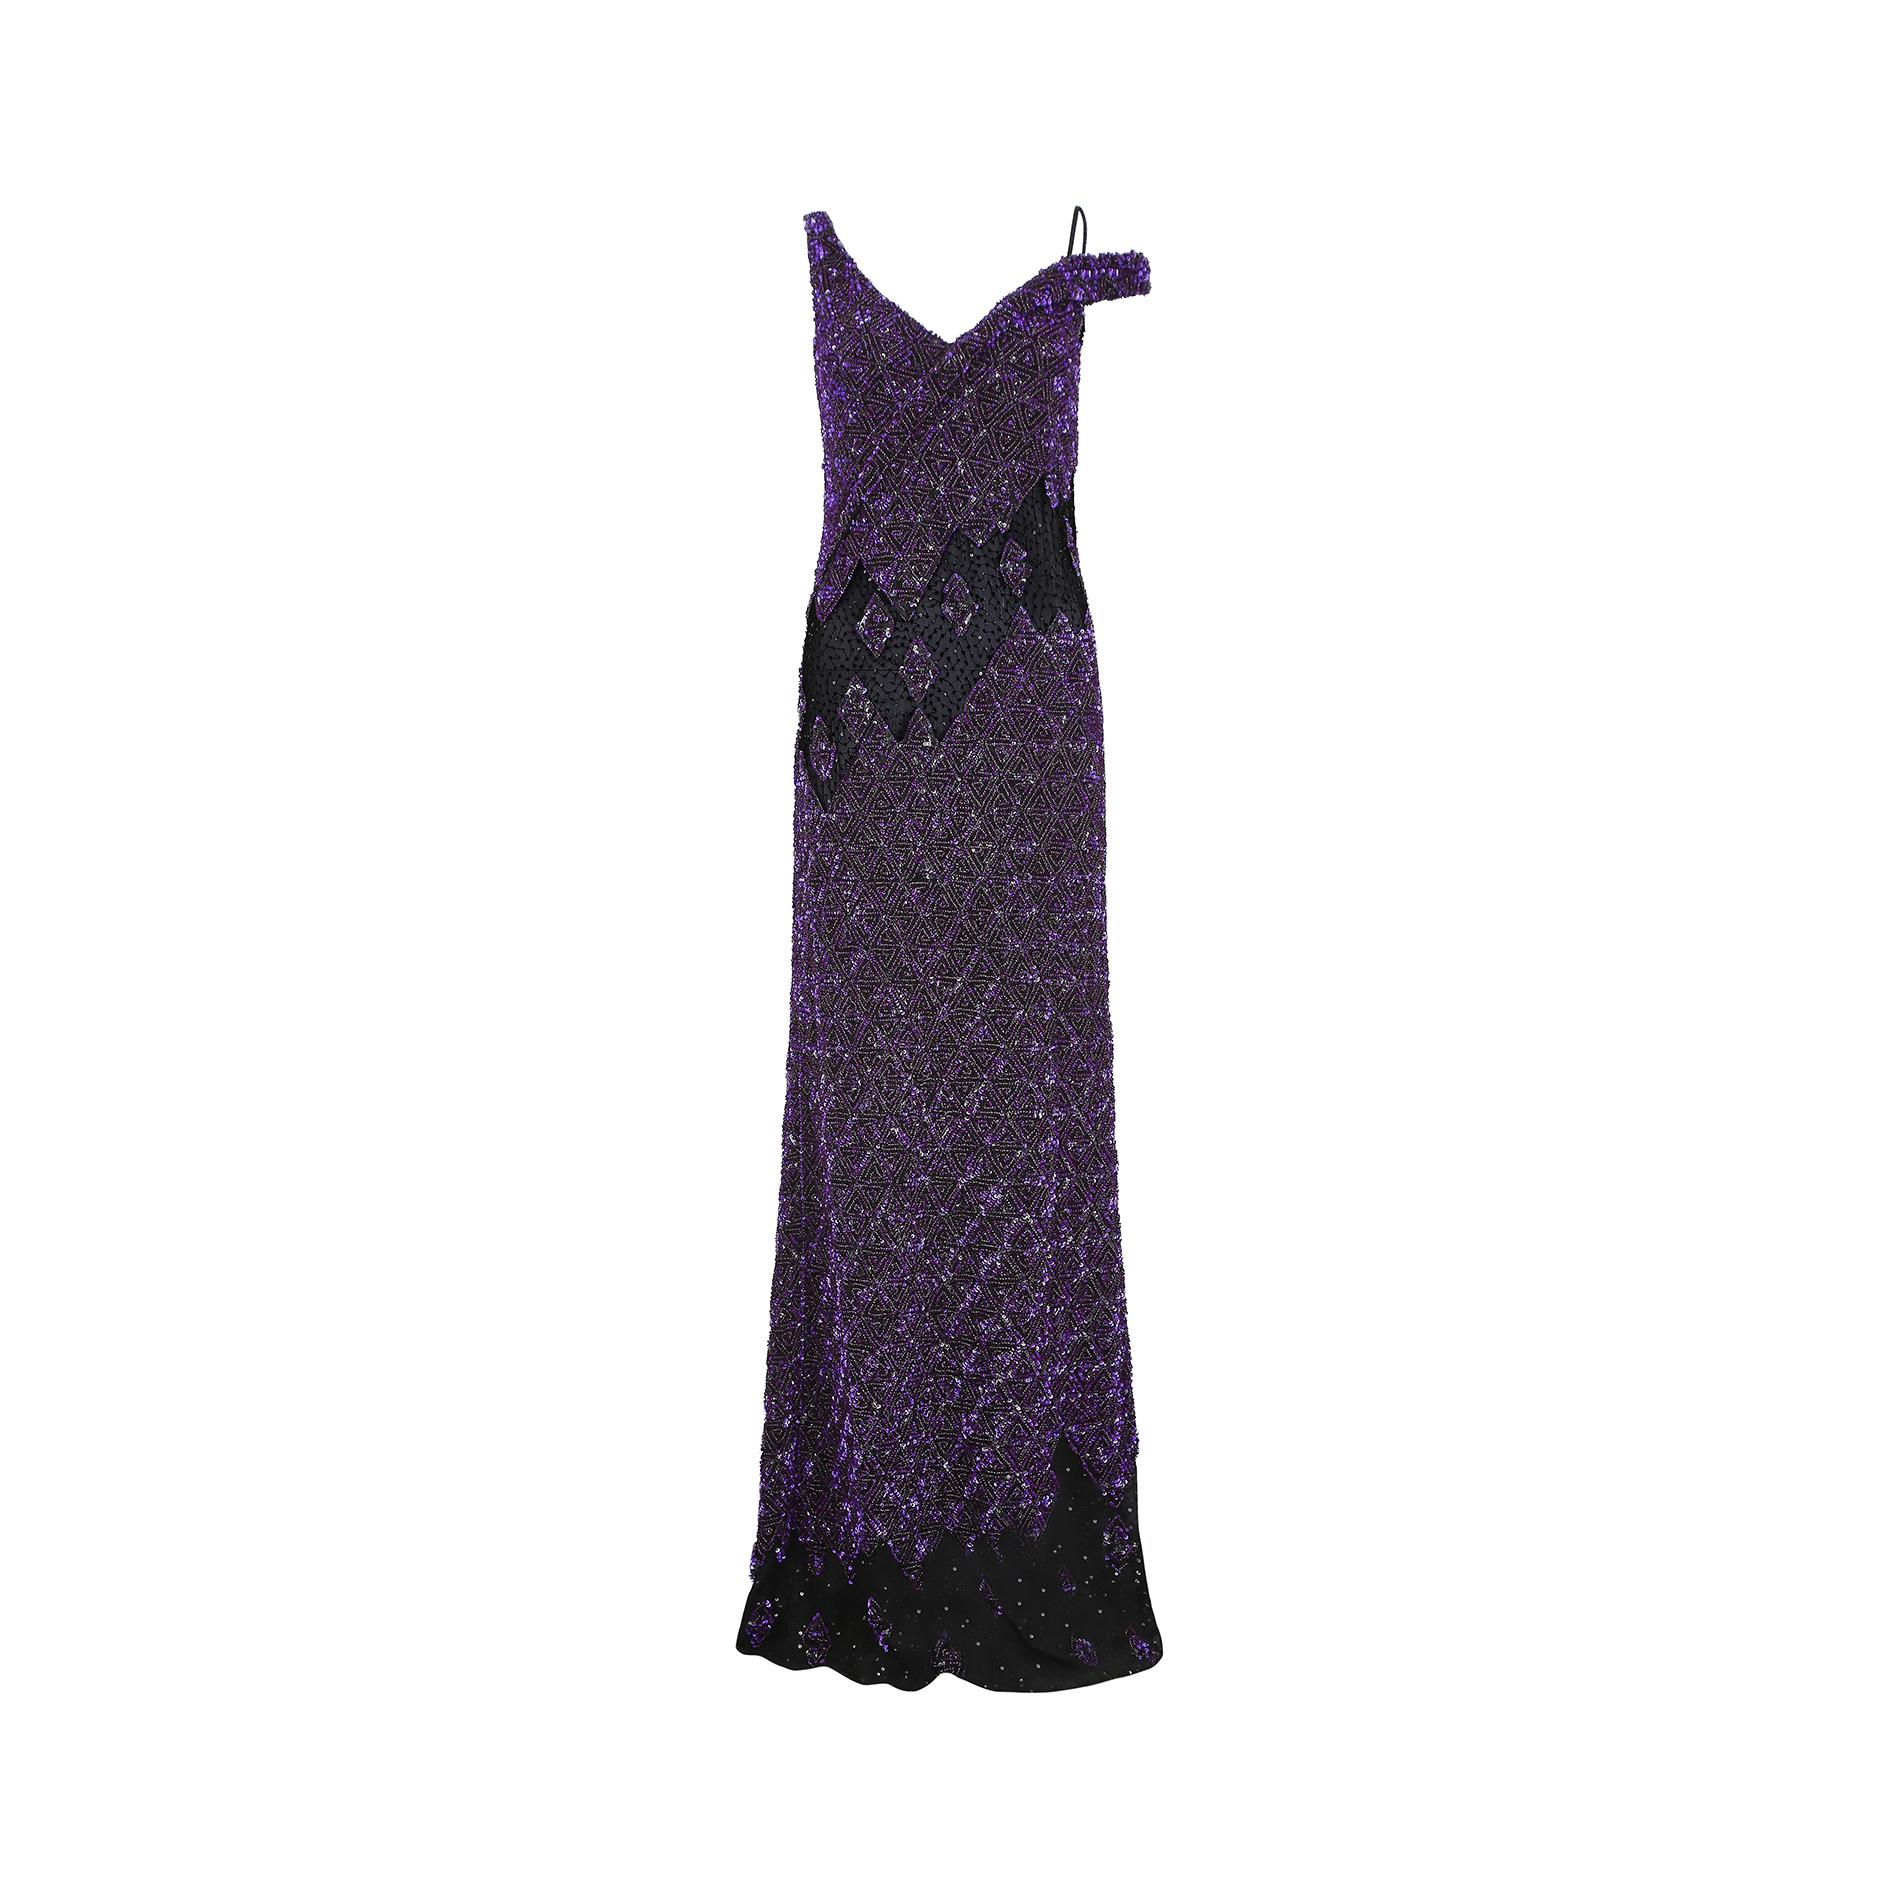 This is a magnificent purple sequin gown by Parisian Atelier Guy Laroche - the exact gown pictured from the Fall/Winter 2007 collection. It has a one shoulder finish, with a V neckline to both front and back, complete with original zip closure and